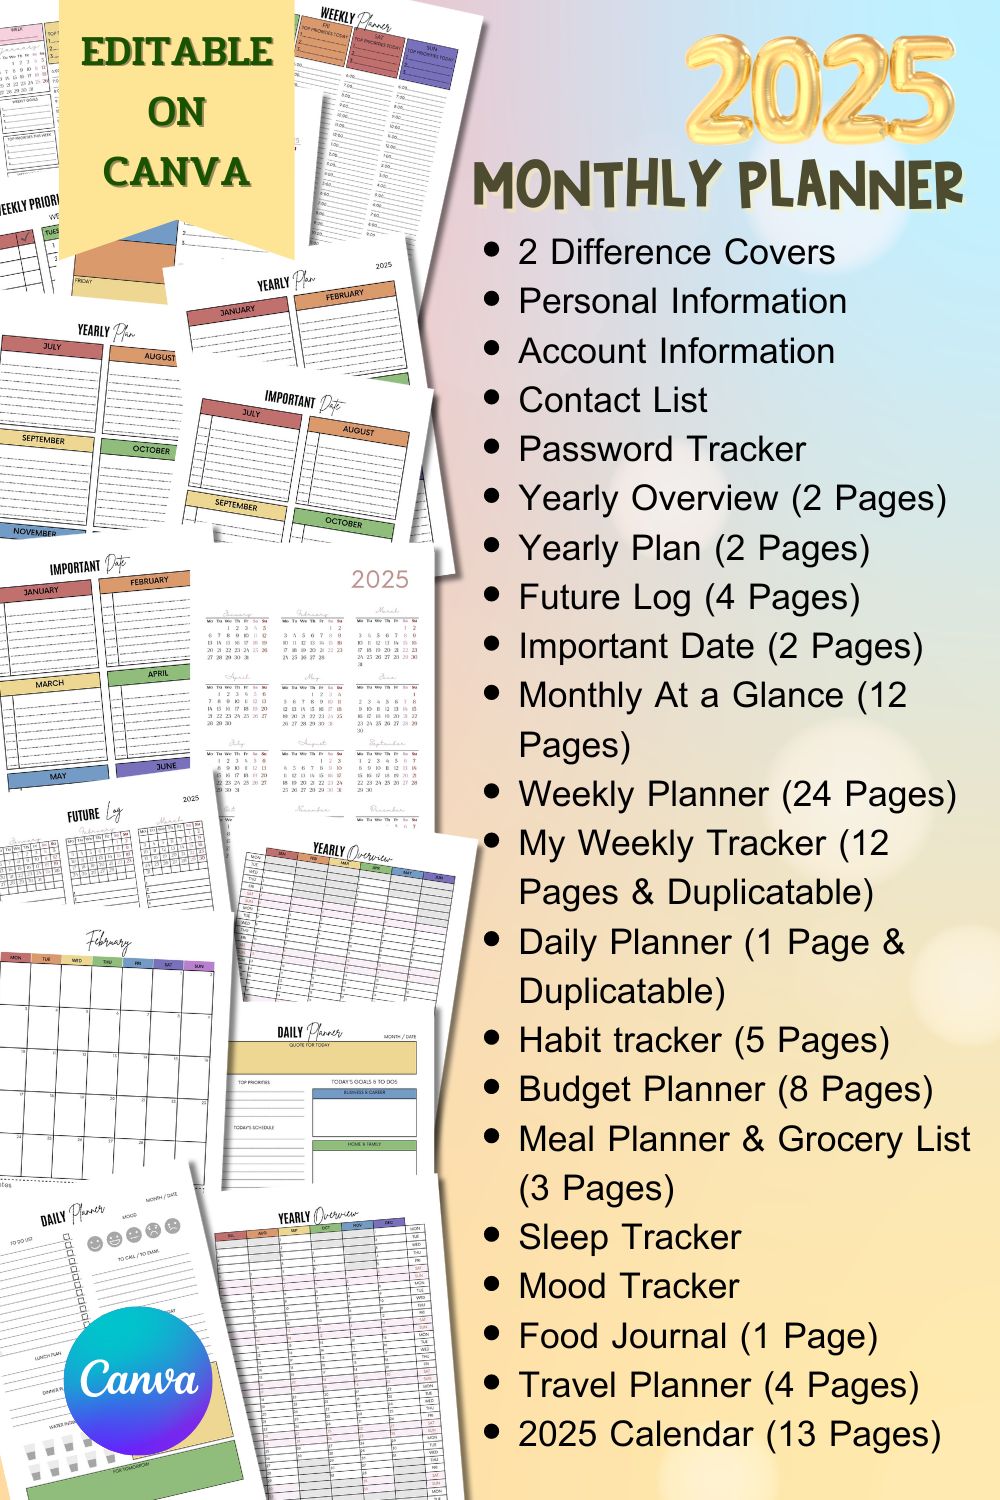 2025 Monthly Planner - Canva Template pinterest preview image.